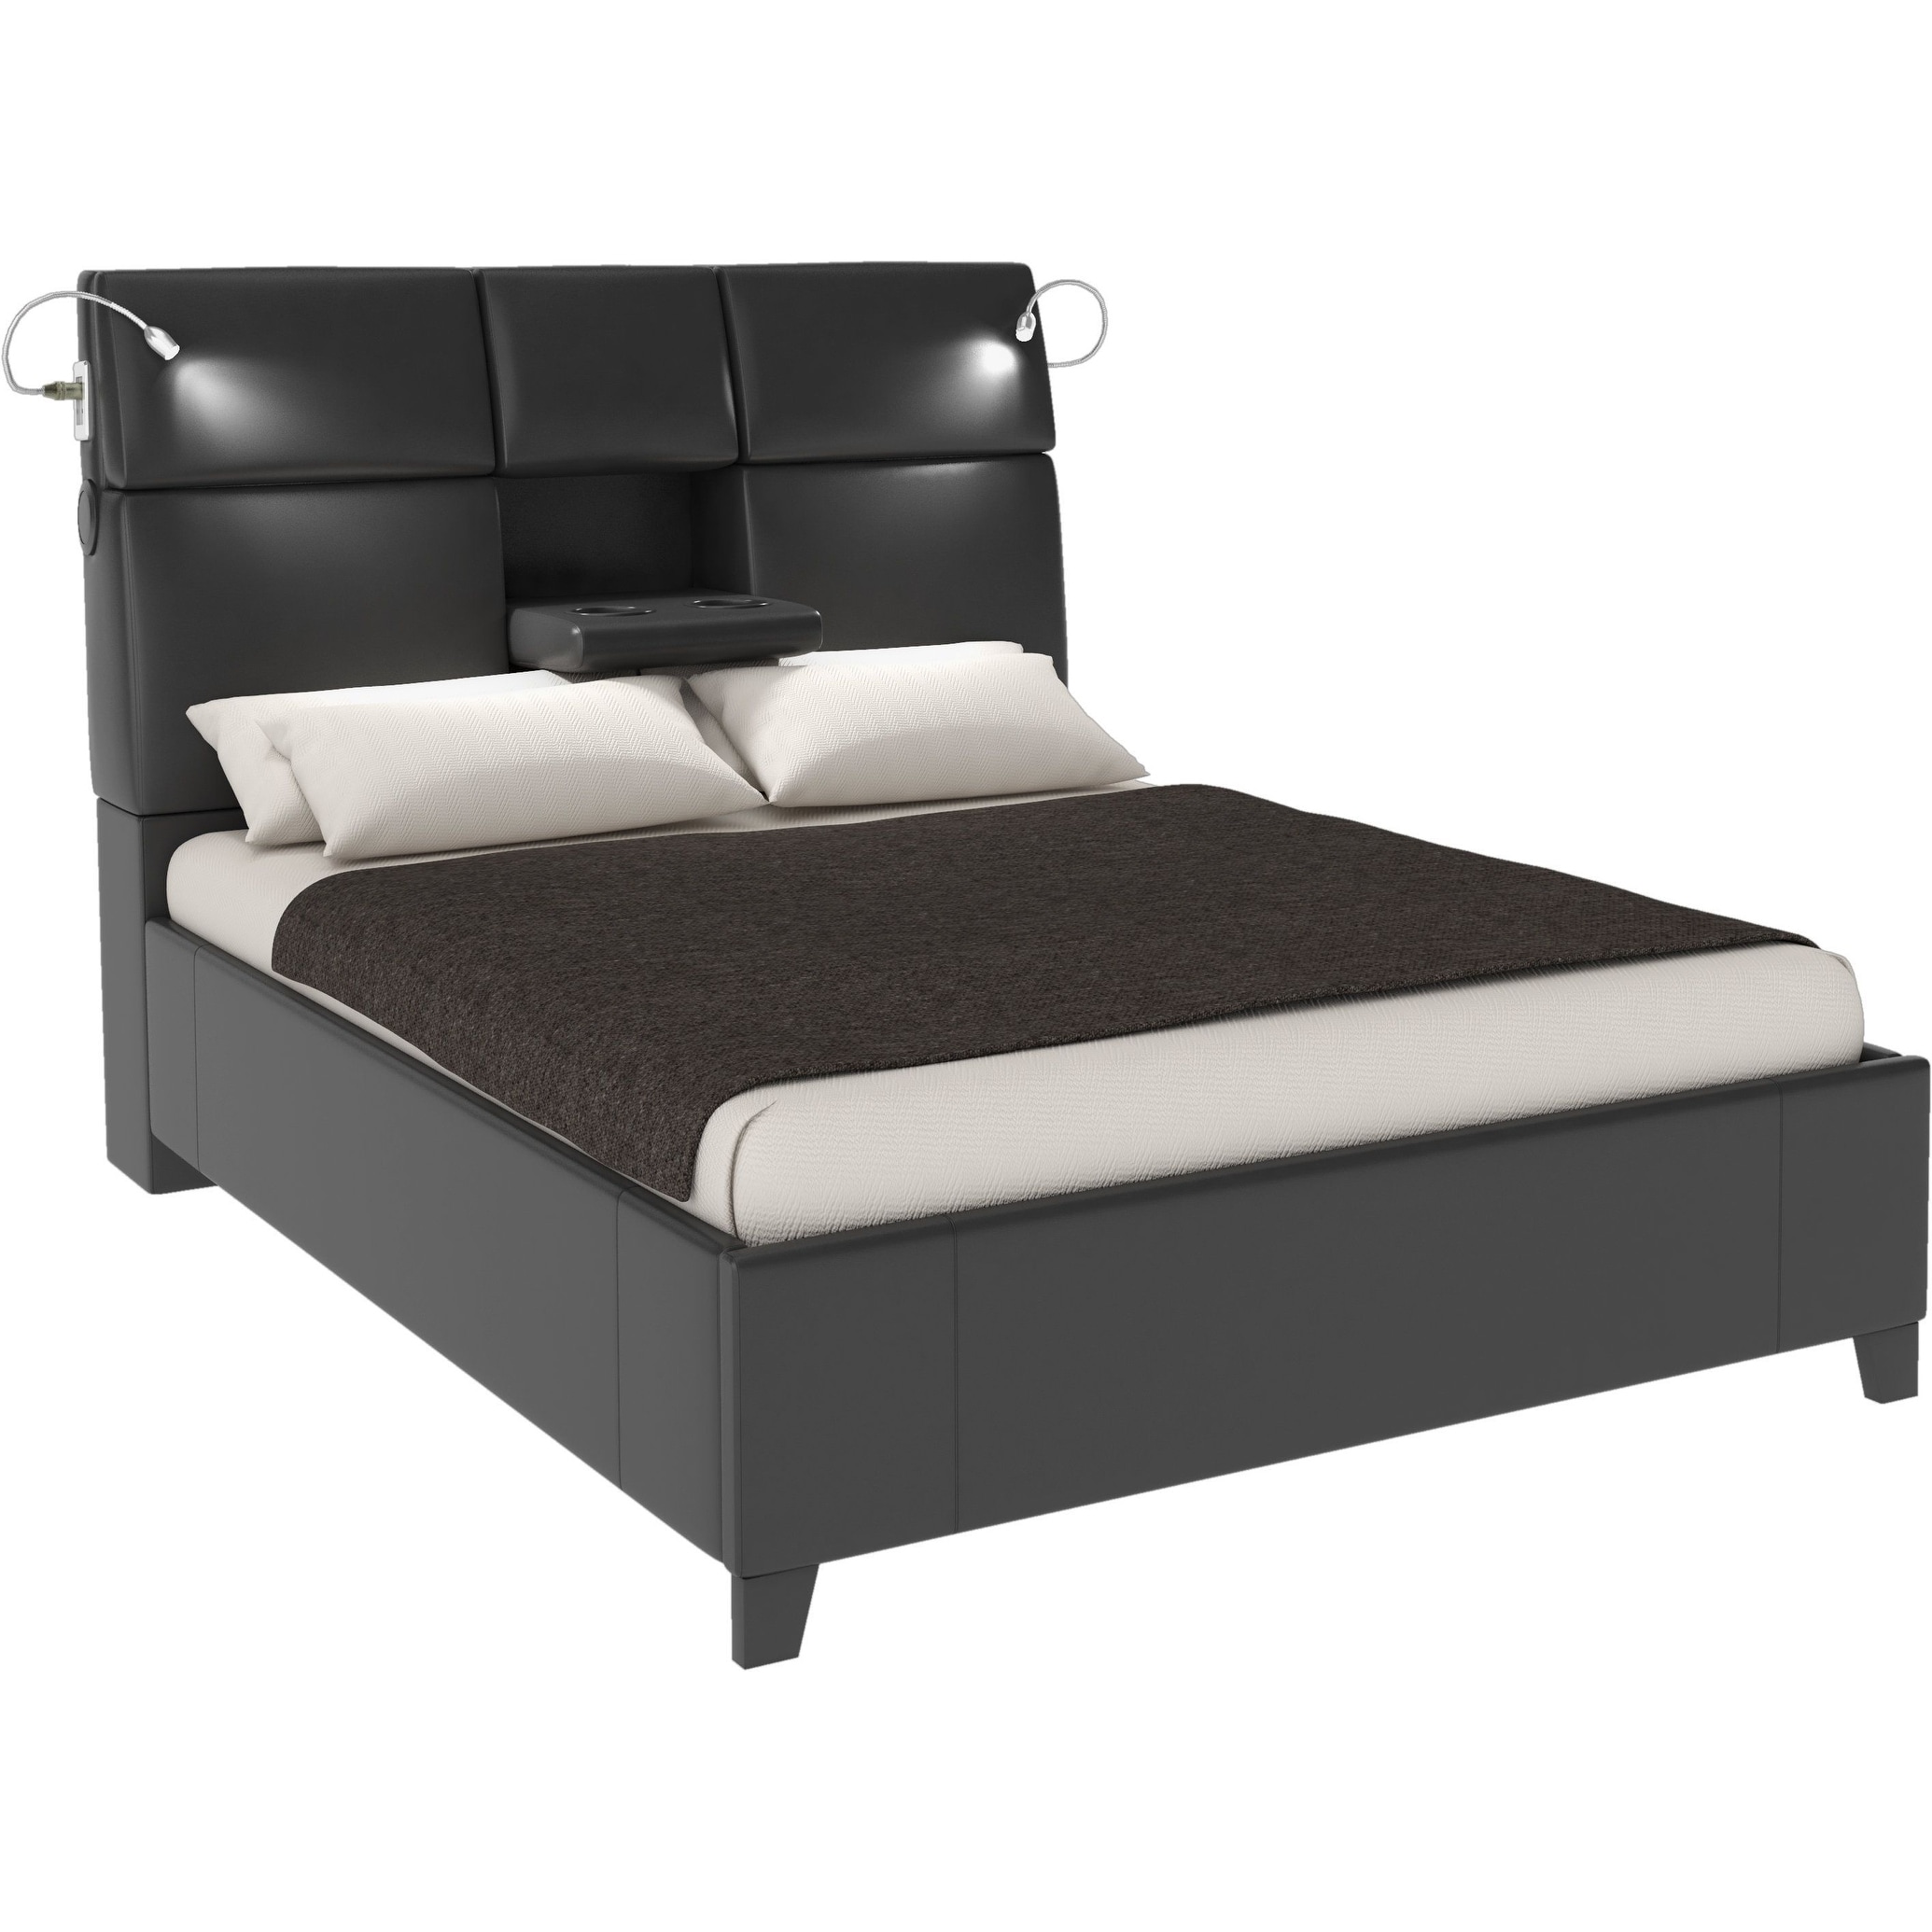 Calypso Upholstered Bed